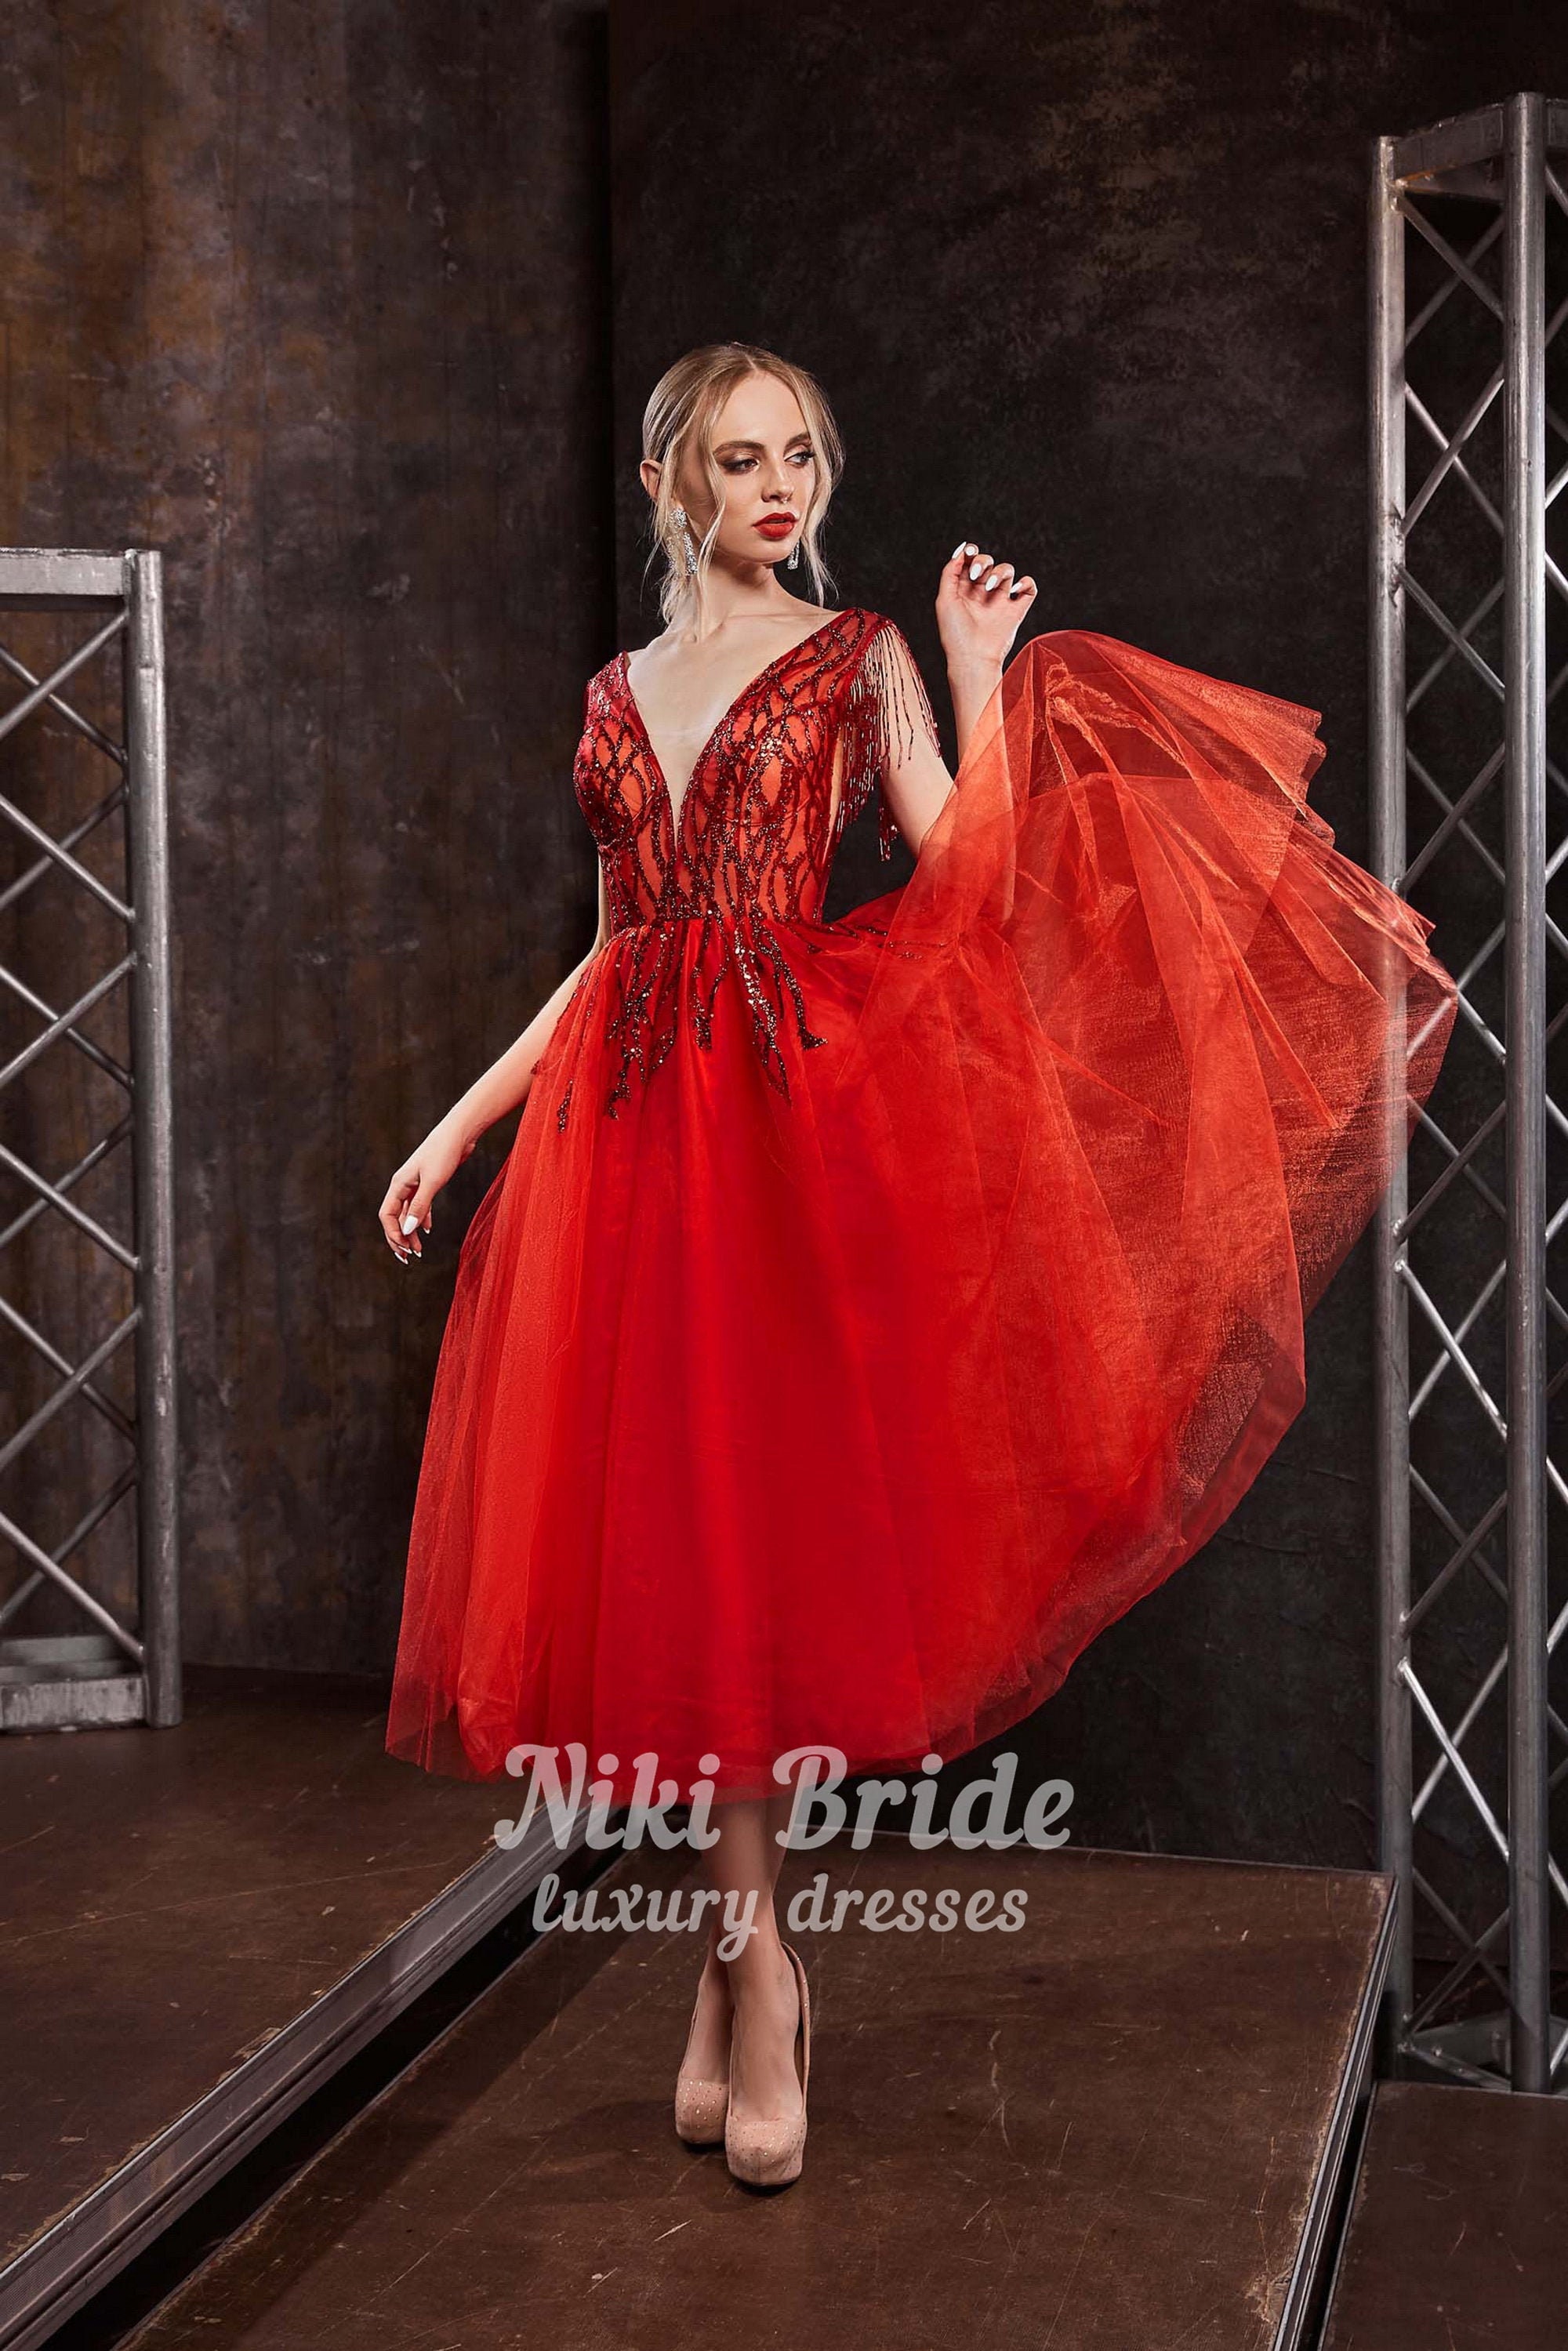 Shiny Sequin Red Tulle Ankle Length Prom Dress with Short Sleeves